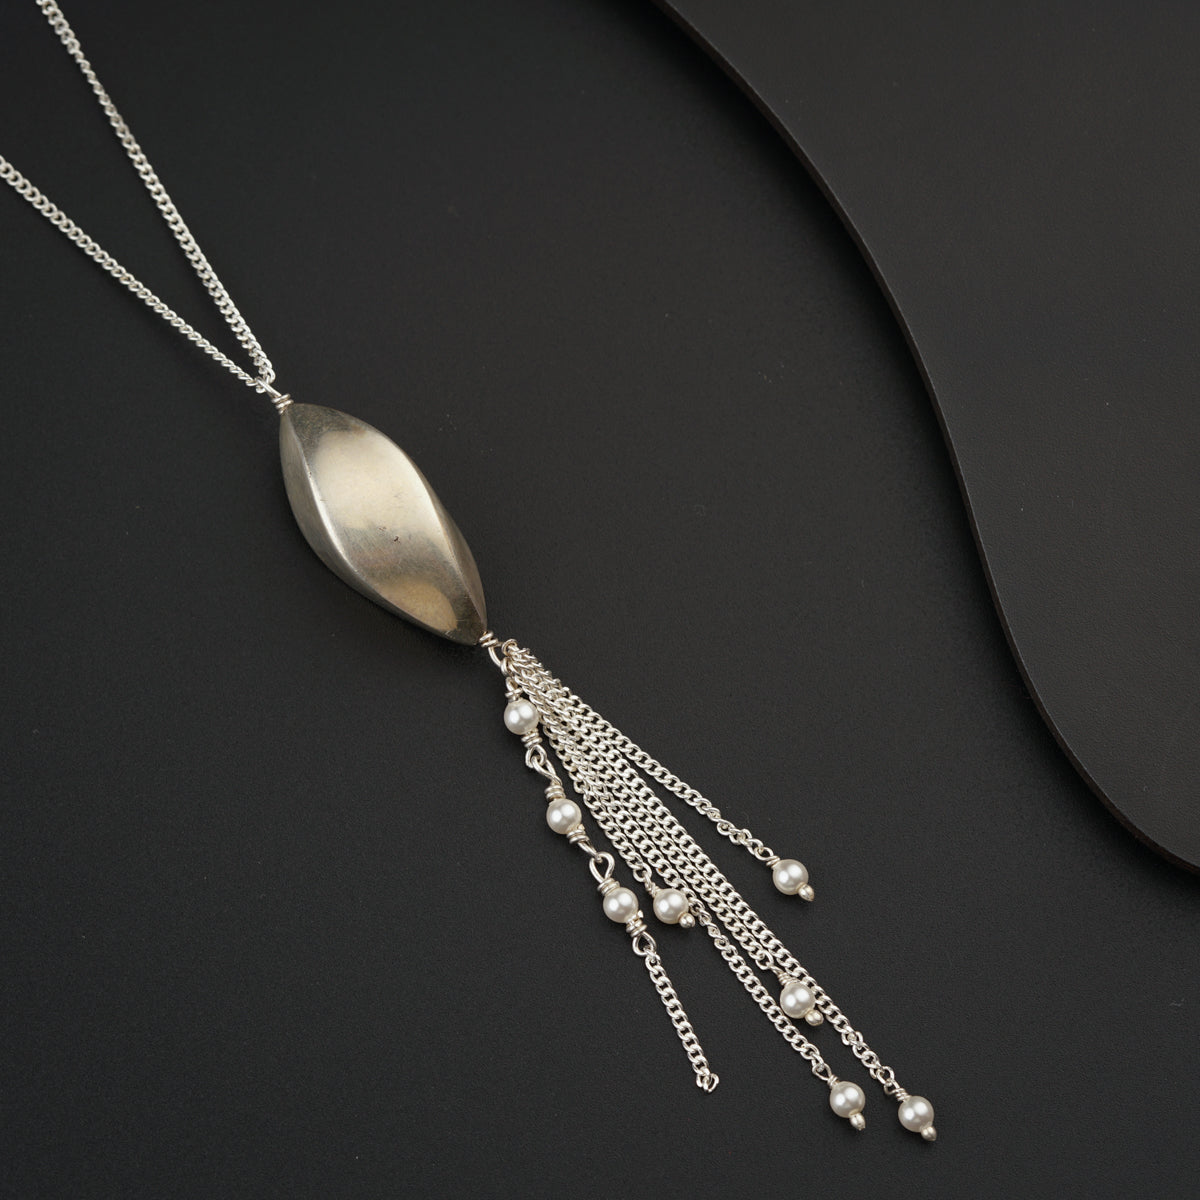 a silver spoon with a chain hanging from it